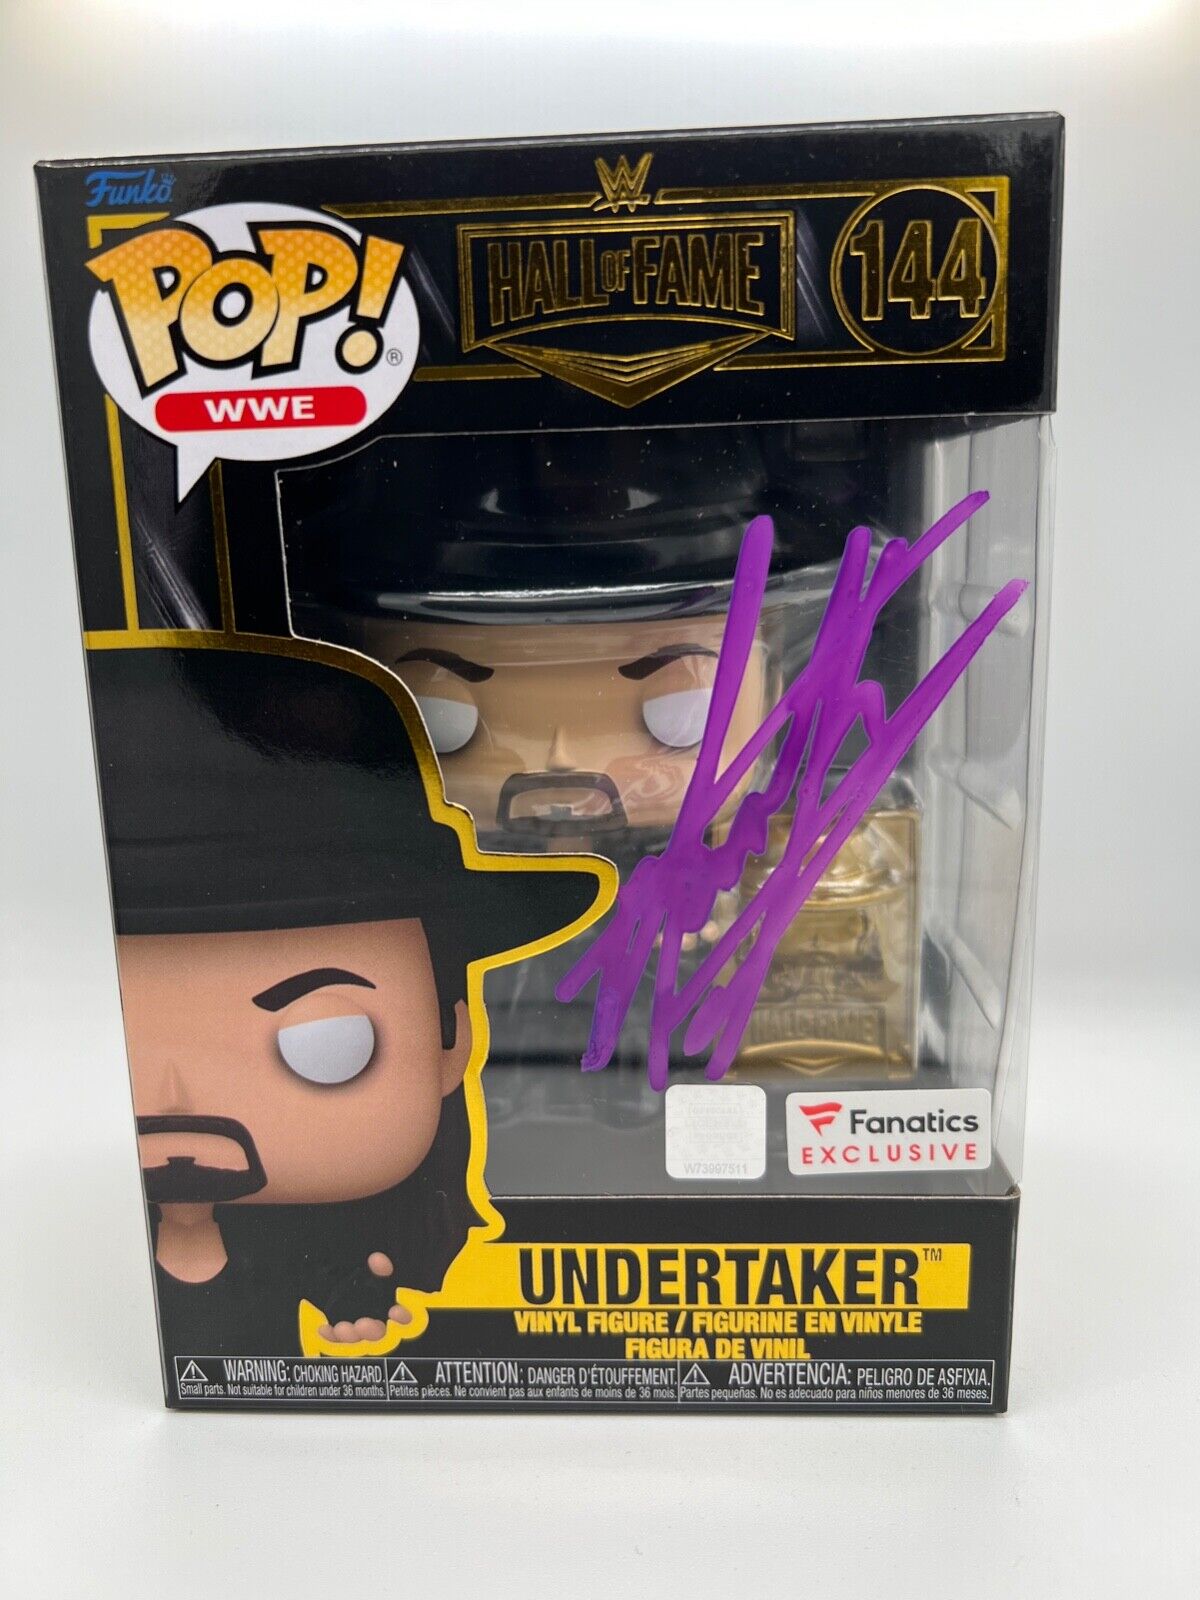 SIGNED Funko Pop WWE Hall of Fame - UNDERTAKER #144 COA AUTHENTICATED